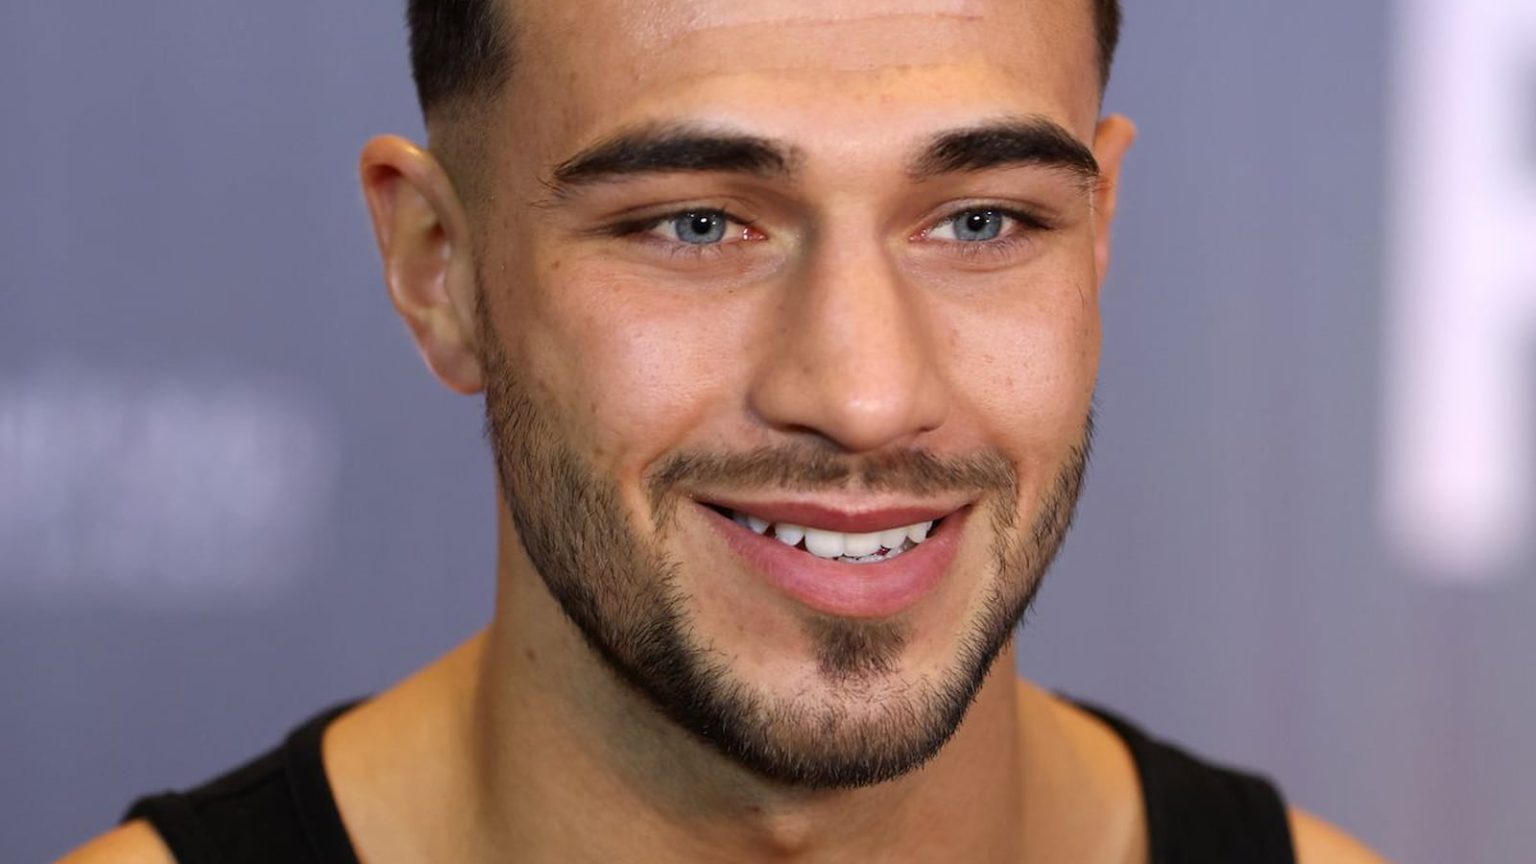 Tommy Fury Biography: Age, Career, Family, Personal Life, and Net Worth